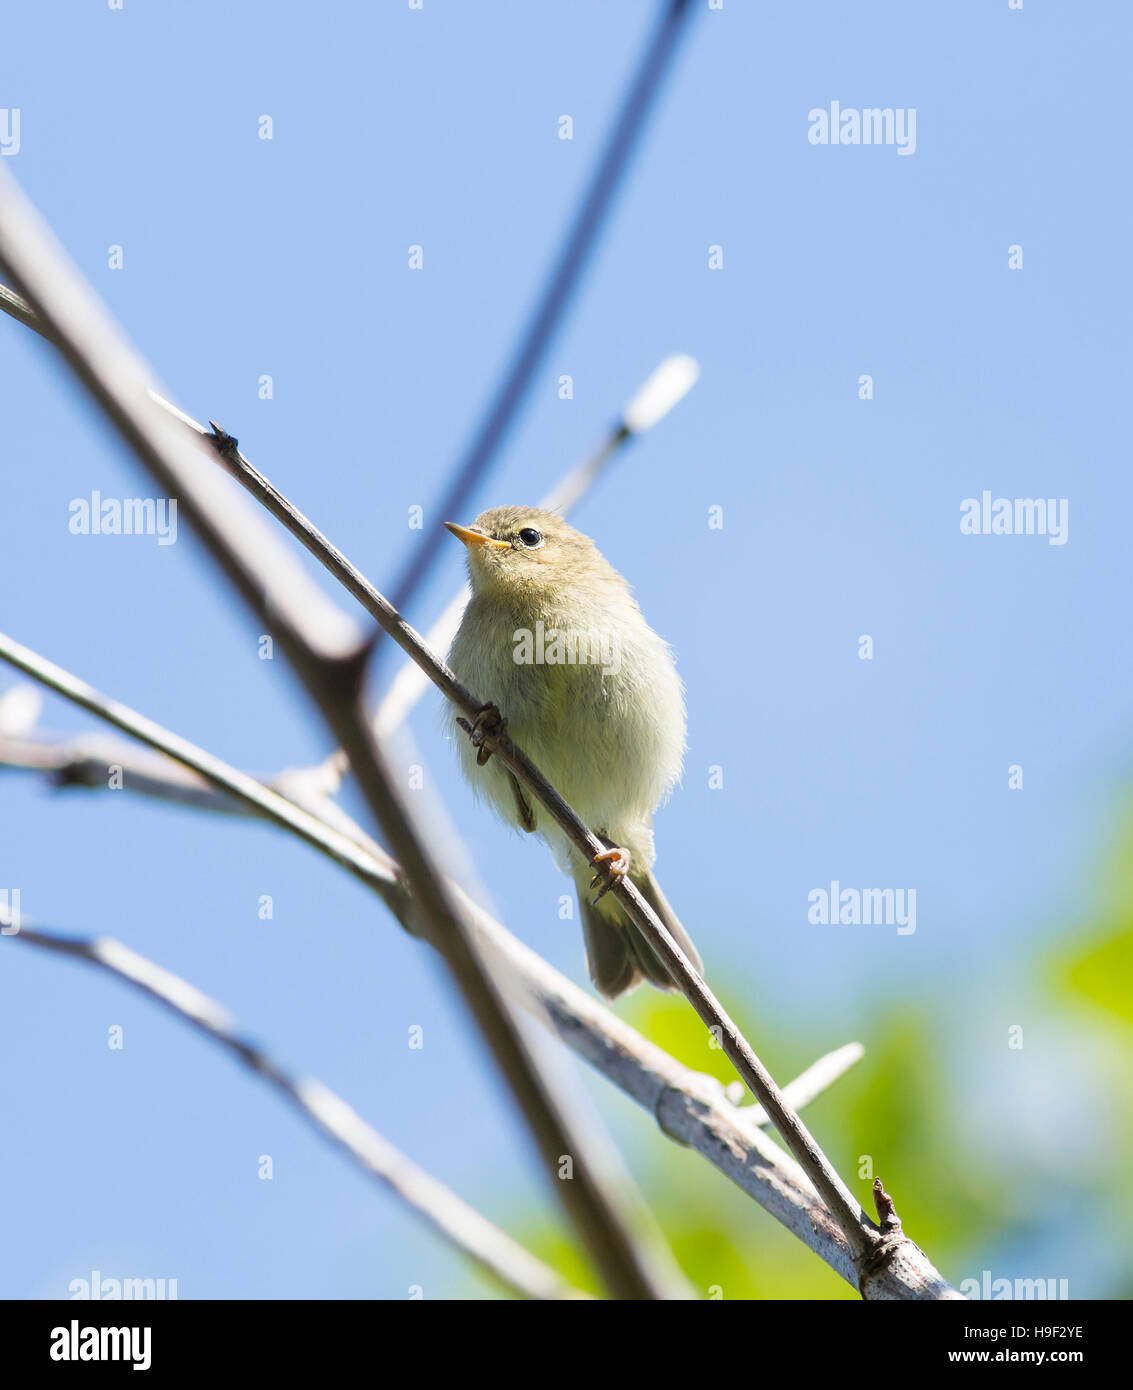 chaffinch fledgling perched on twig Stock Photo